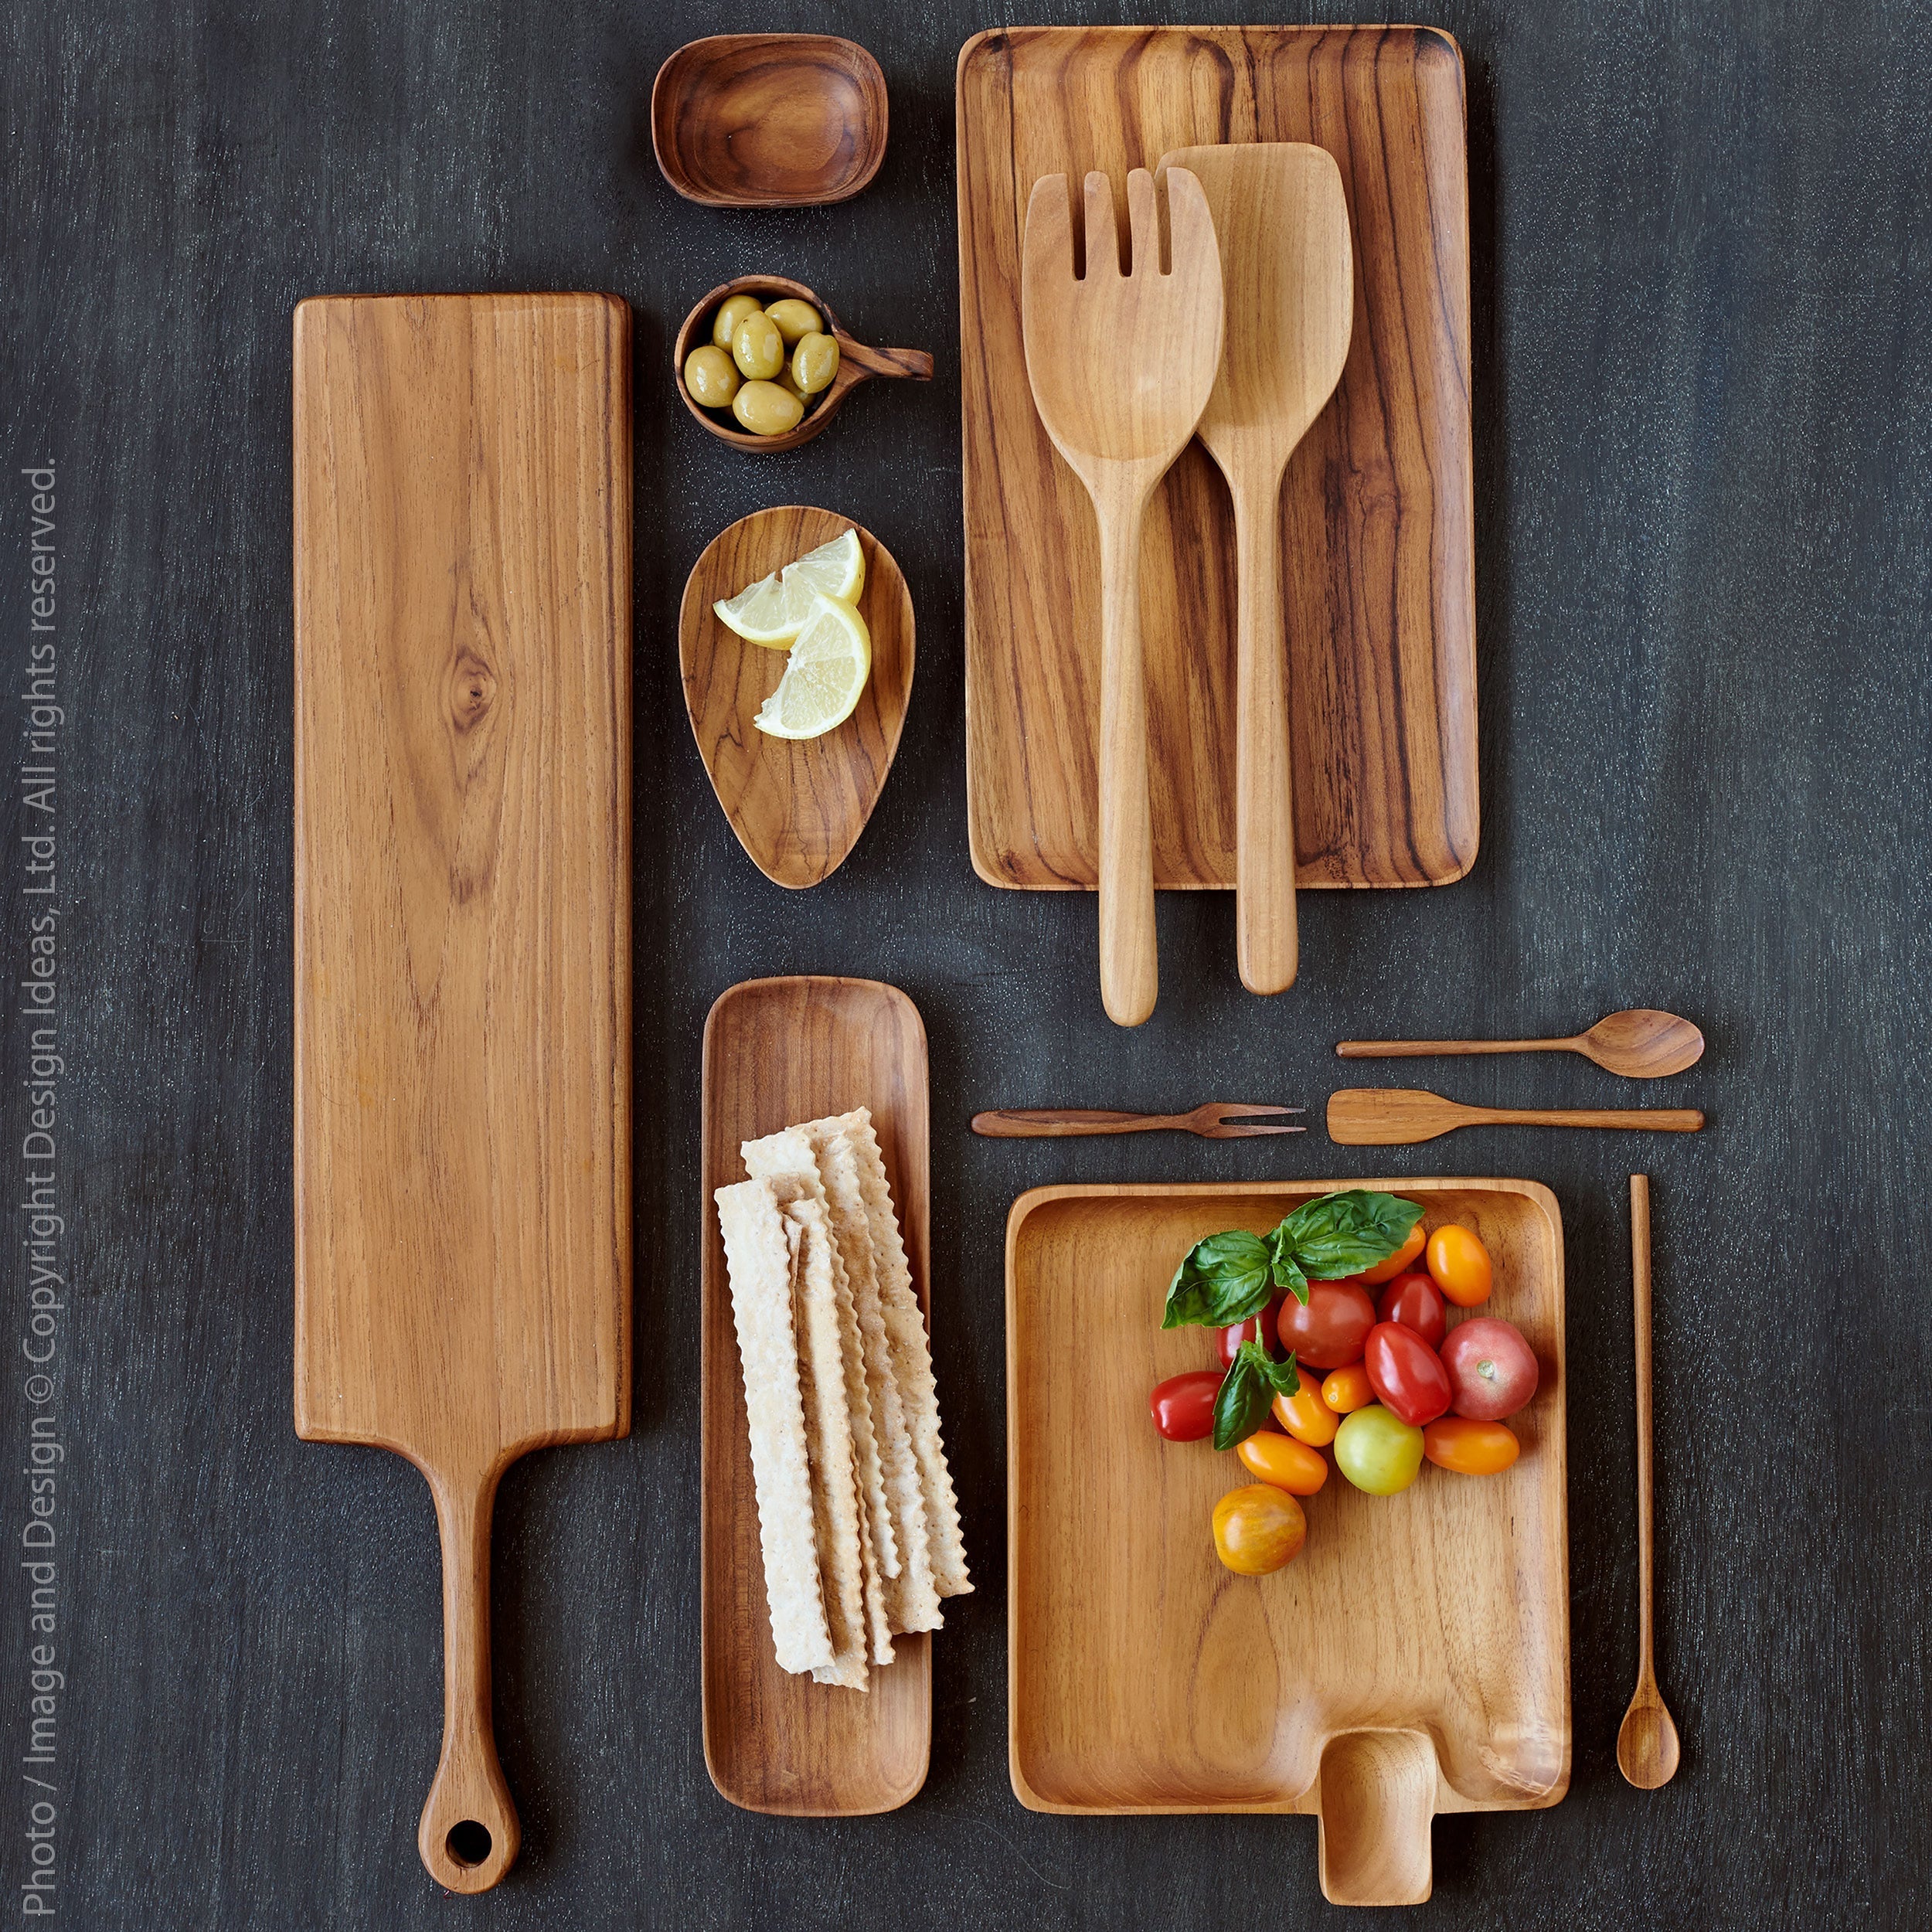 Chiku Teak Spoon   | Image 3 | From the Chiku Collection | Skillfully made with natural teak for long lasting use | These utensils are sustainably sourced | Available in natural color | texxture home